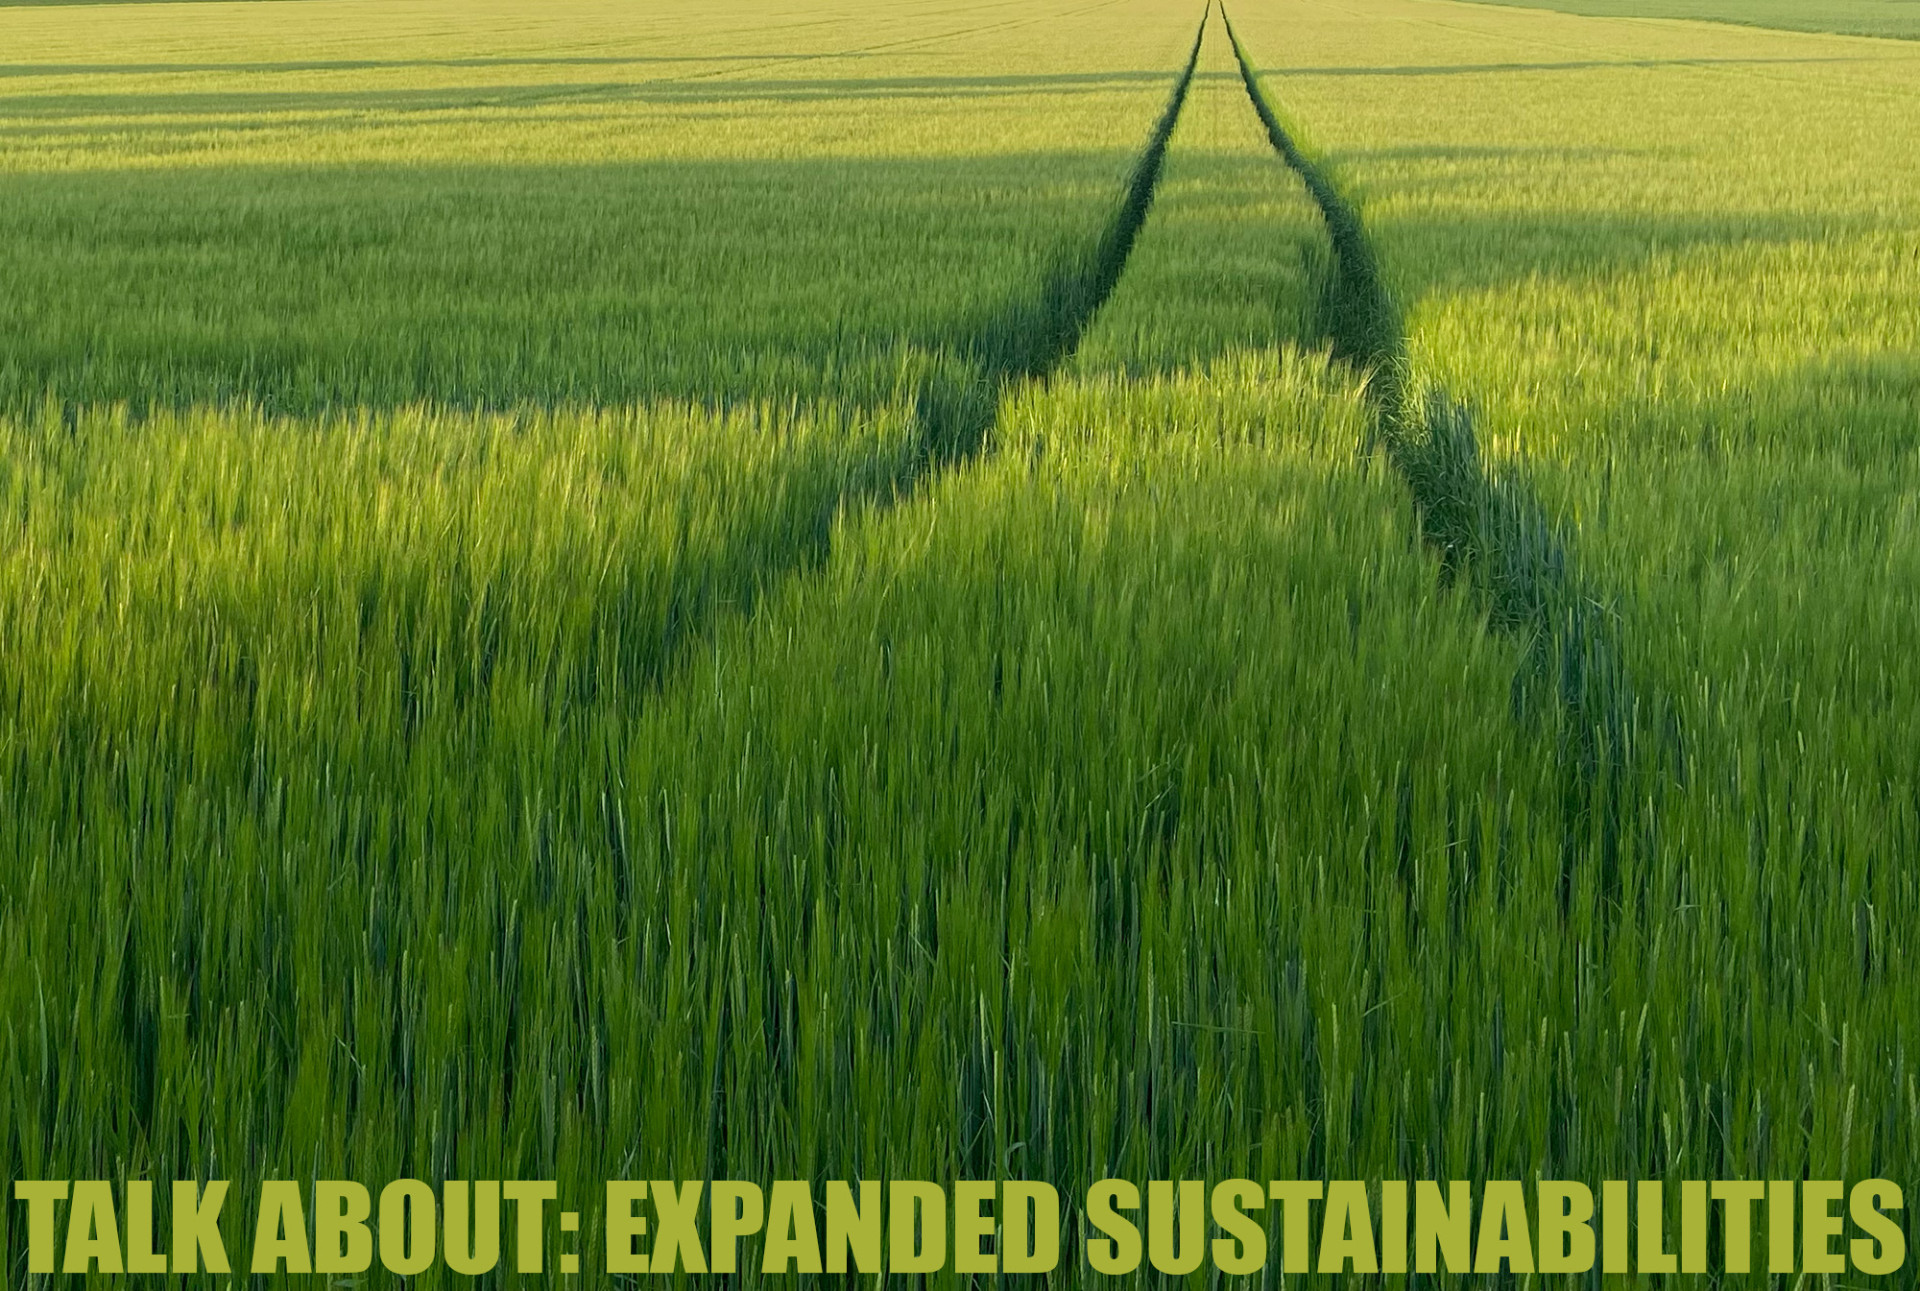 Talk About EXPANDED SUSTAINABILITY